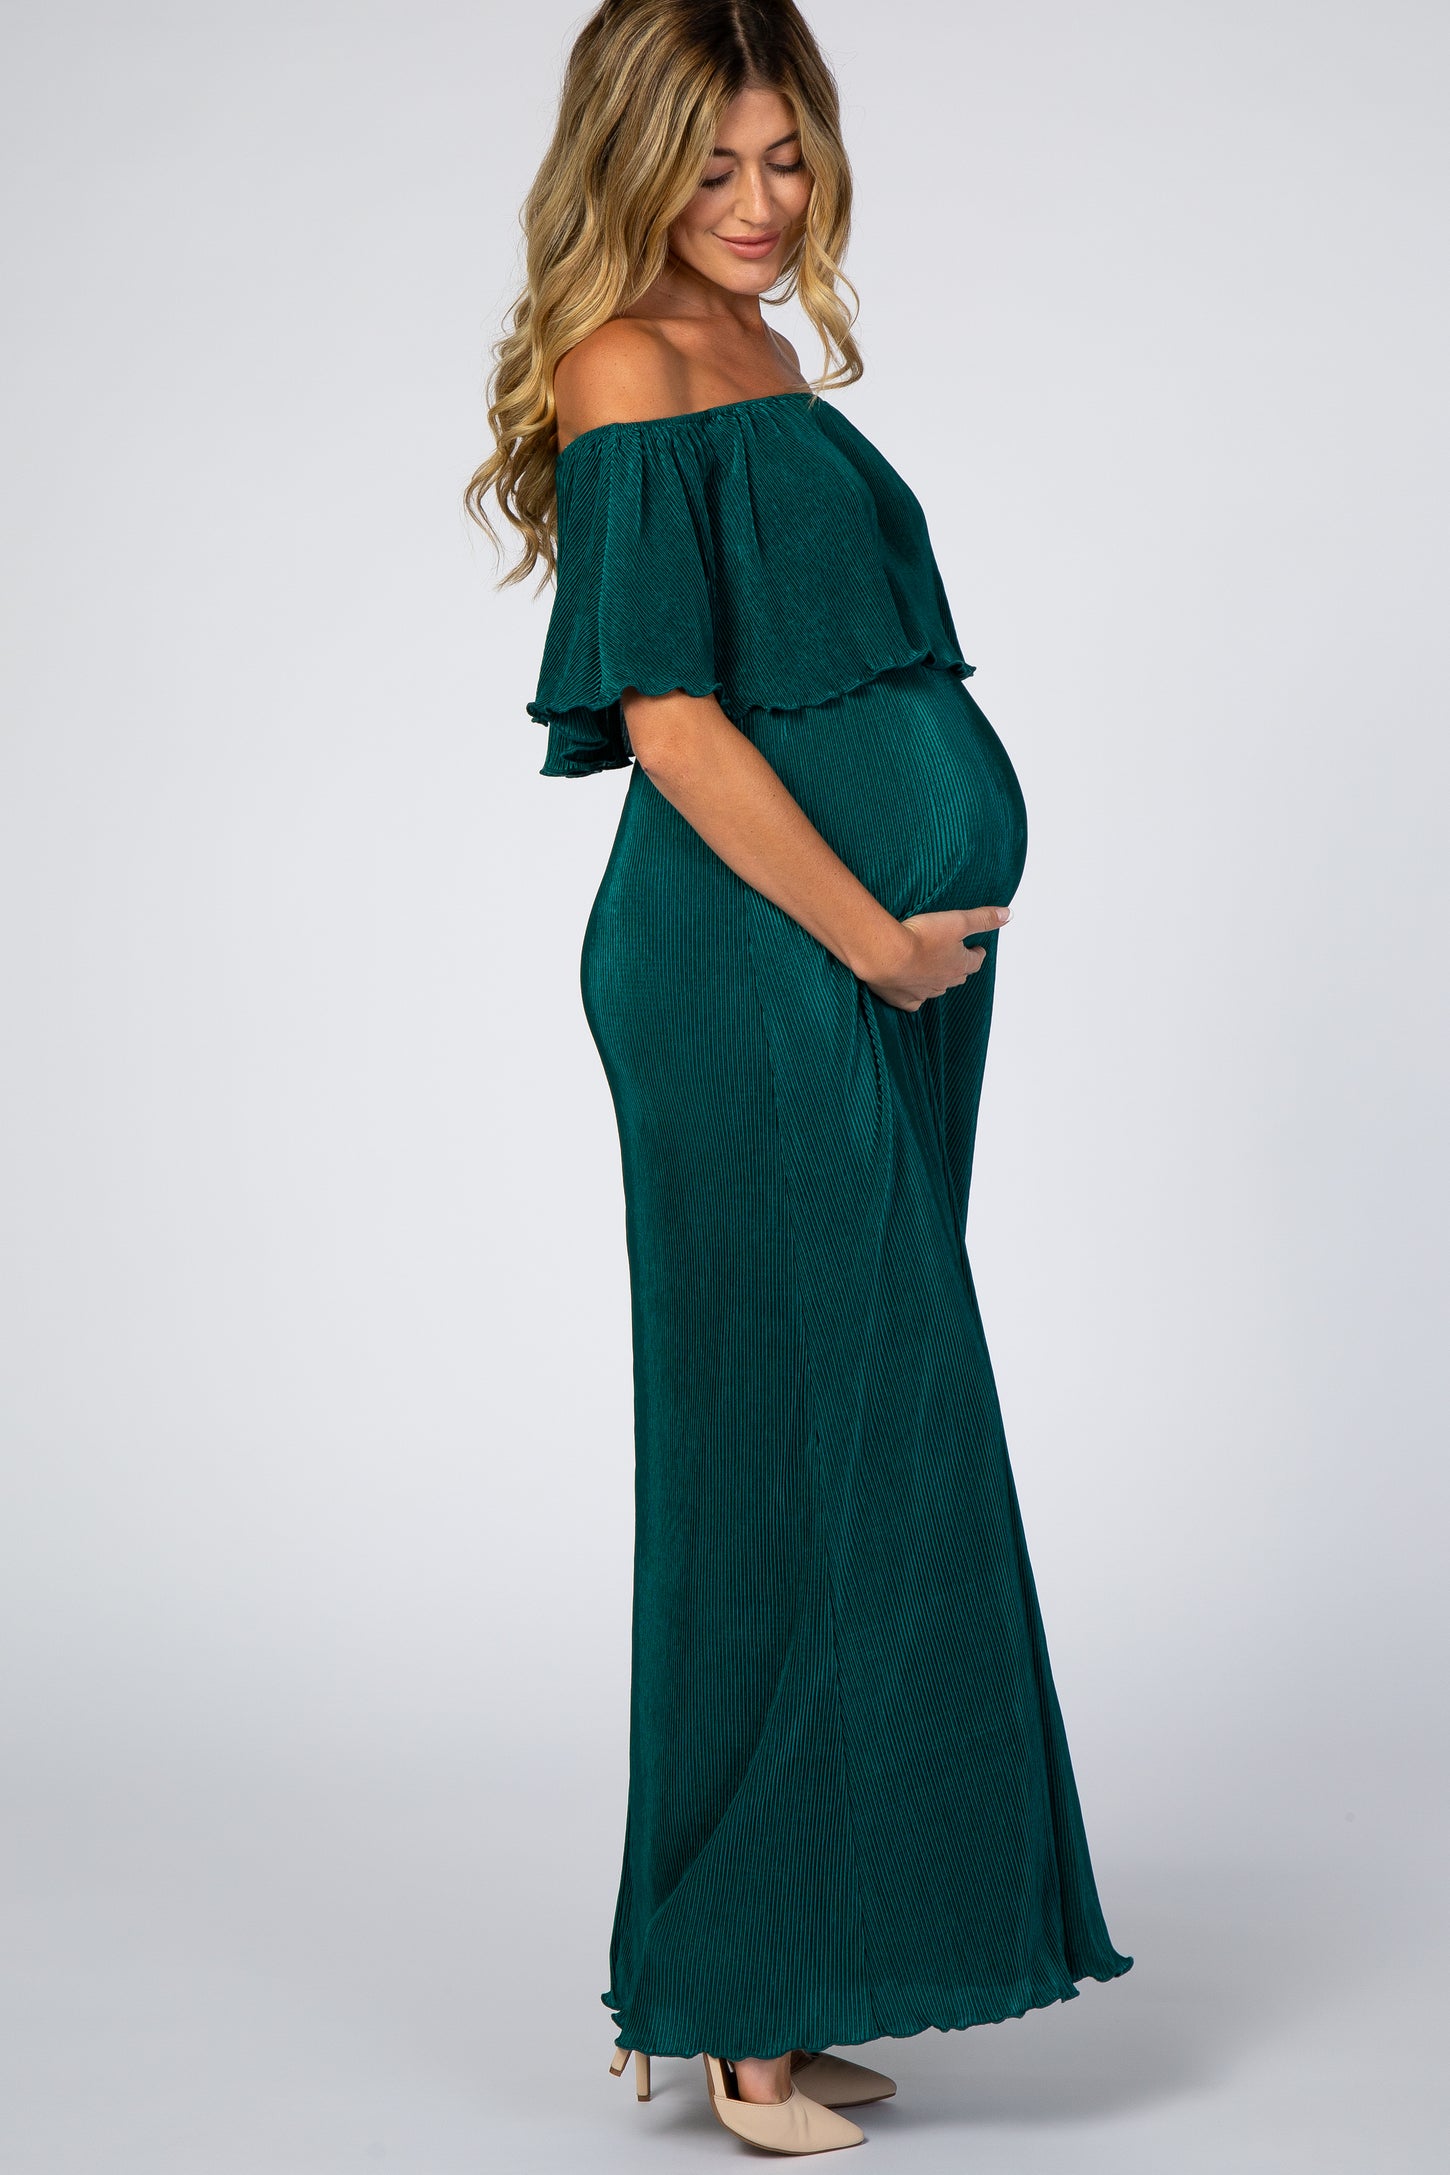 Forest Green Pleated Ruffle Off Shoulder Maternity Maxi Dress – PinkBlush